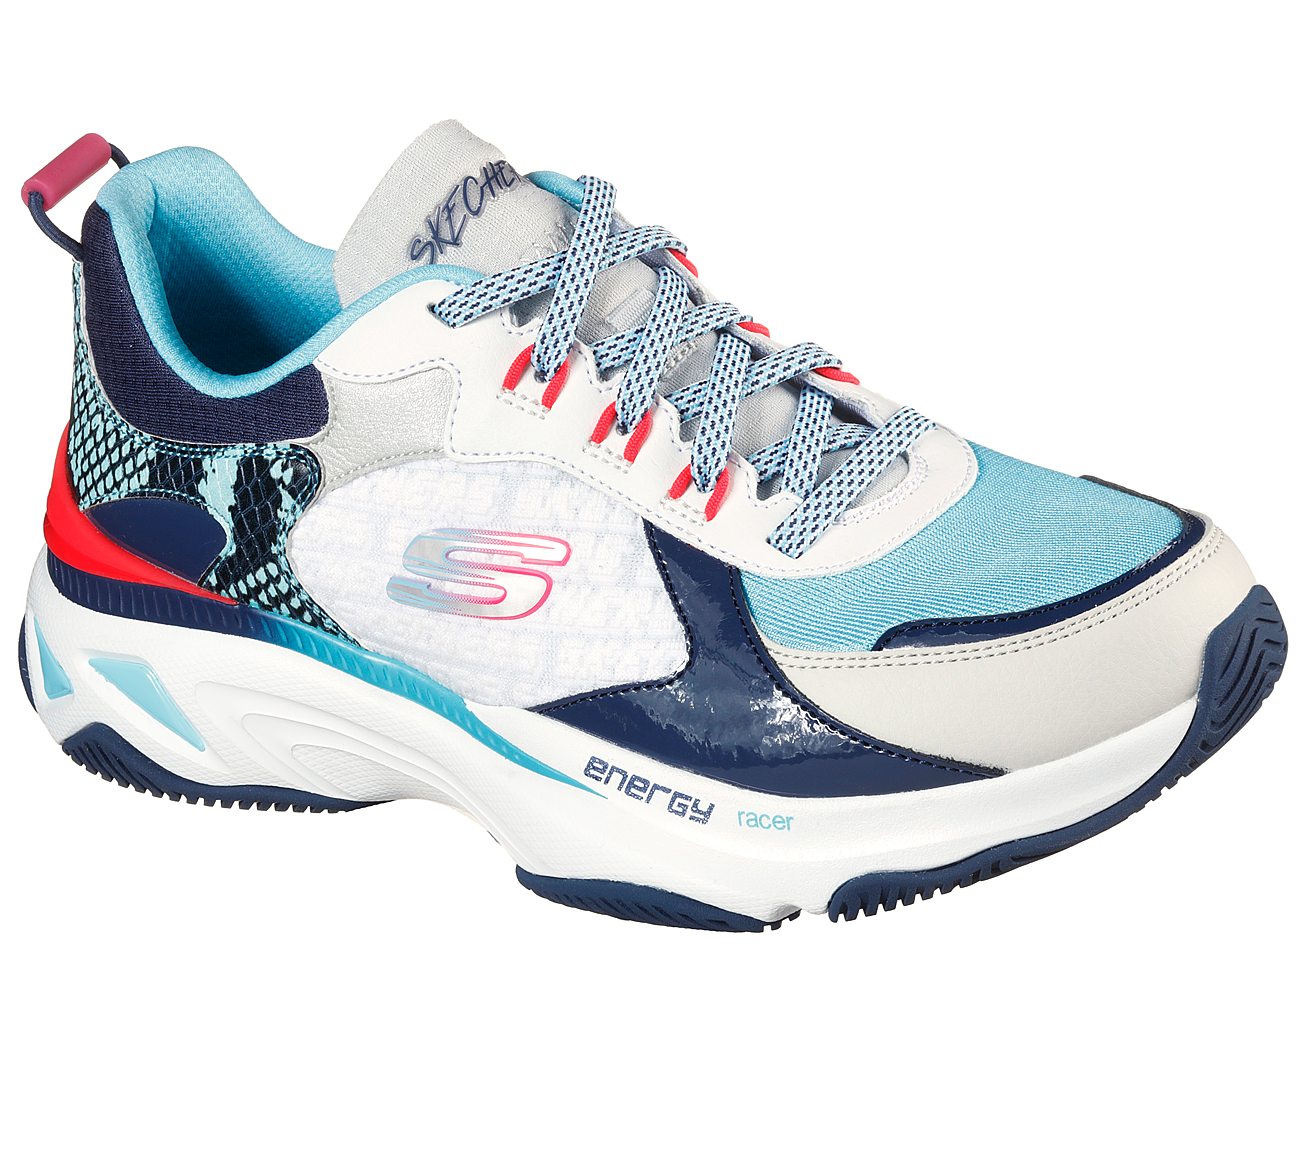 ENERGY RACER-OH SO COOL, WHITE/BLUE/PINK Footwear Top View